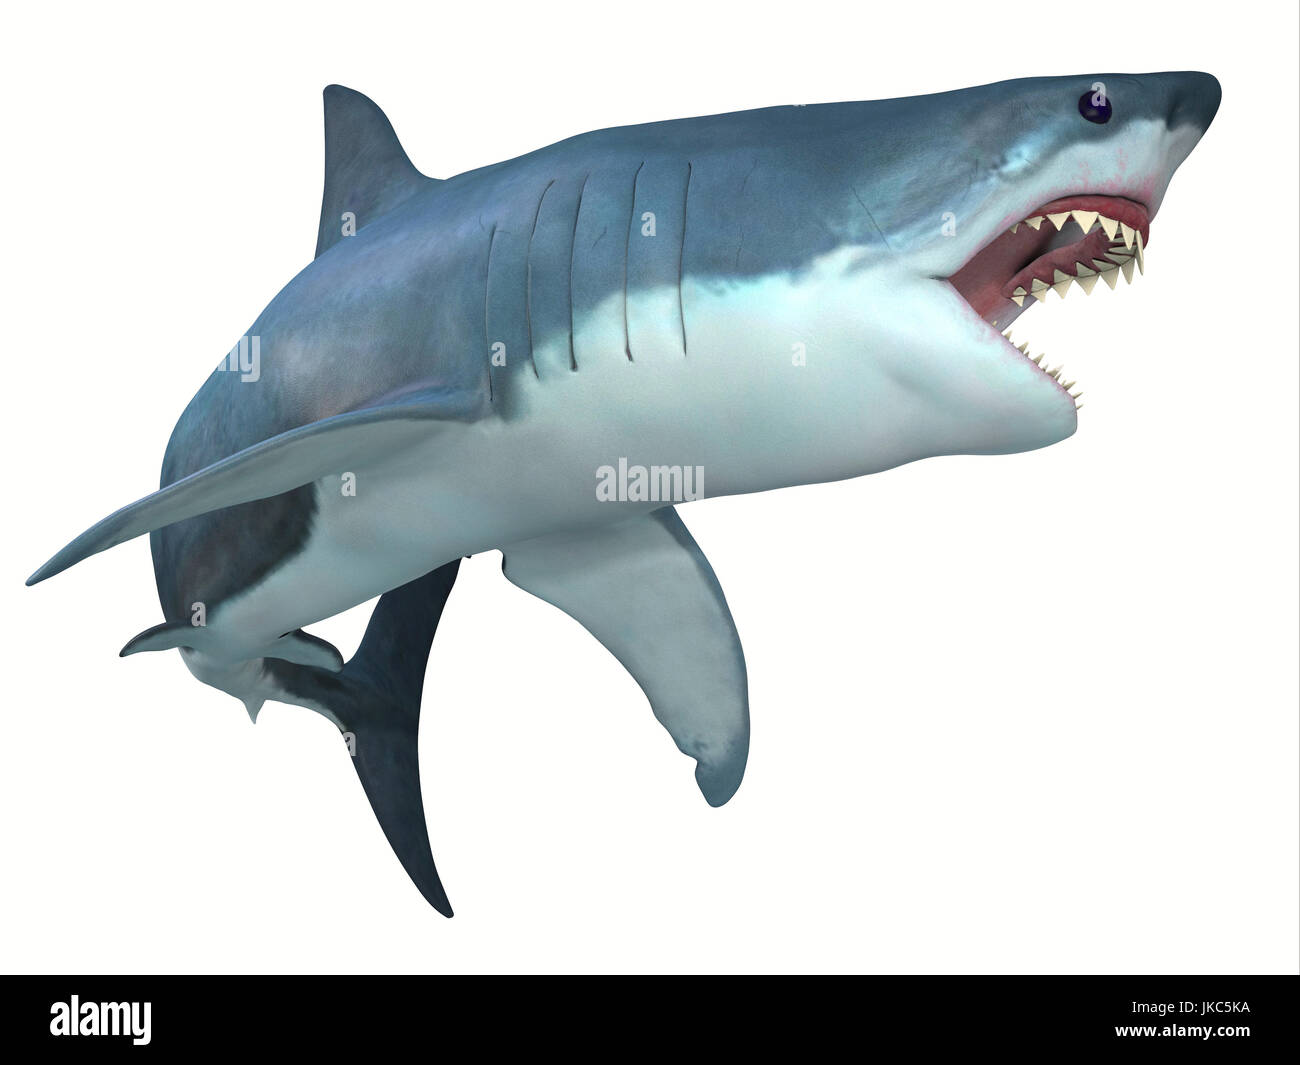 Dangerous Great White Shark - The Great White shark can live for 70 years and grow to be 21 feet long and live in coastal surface waters. Stock Photo